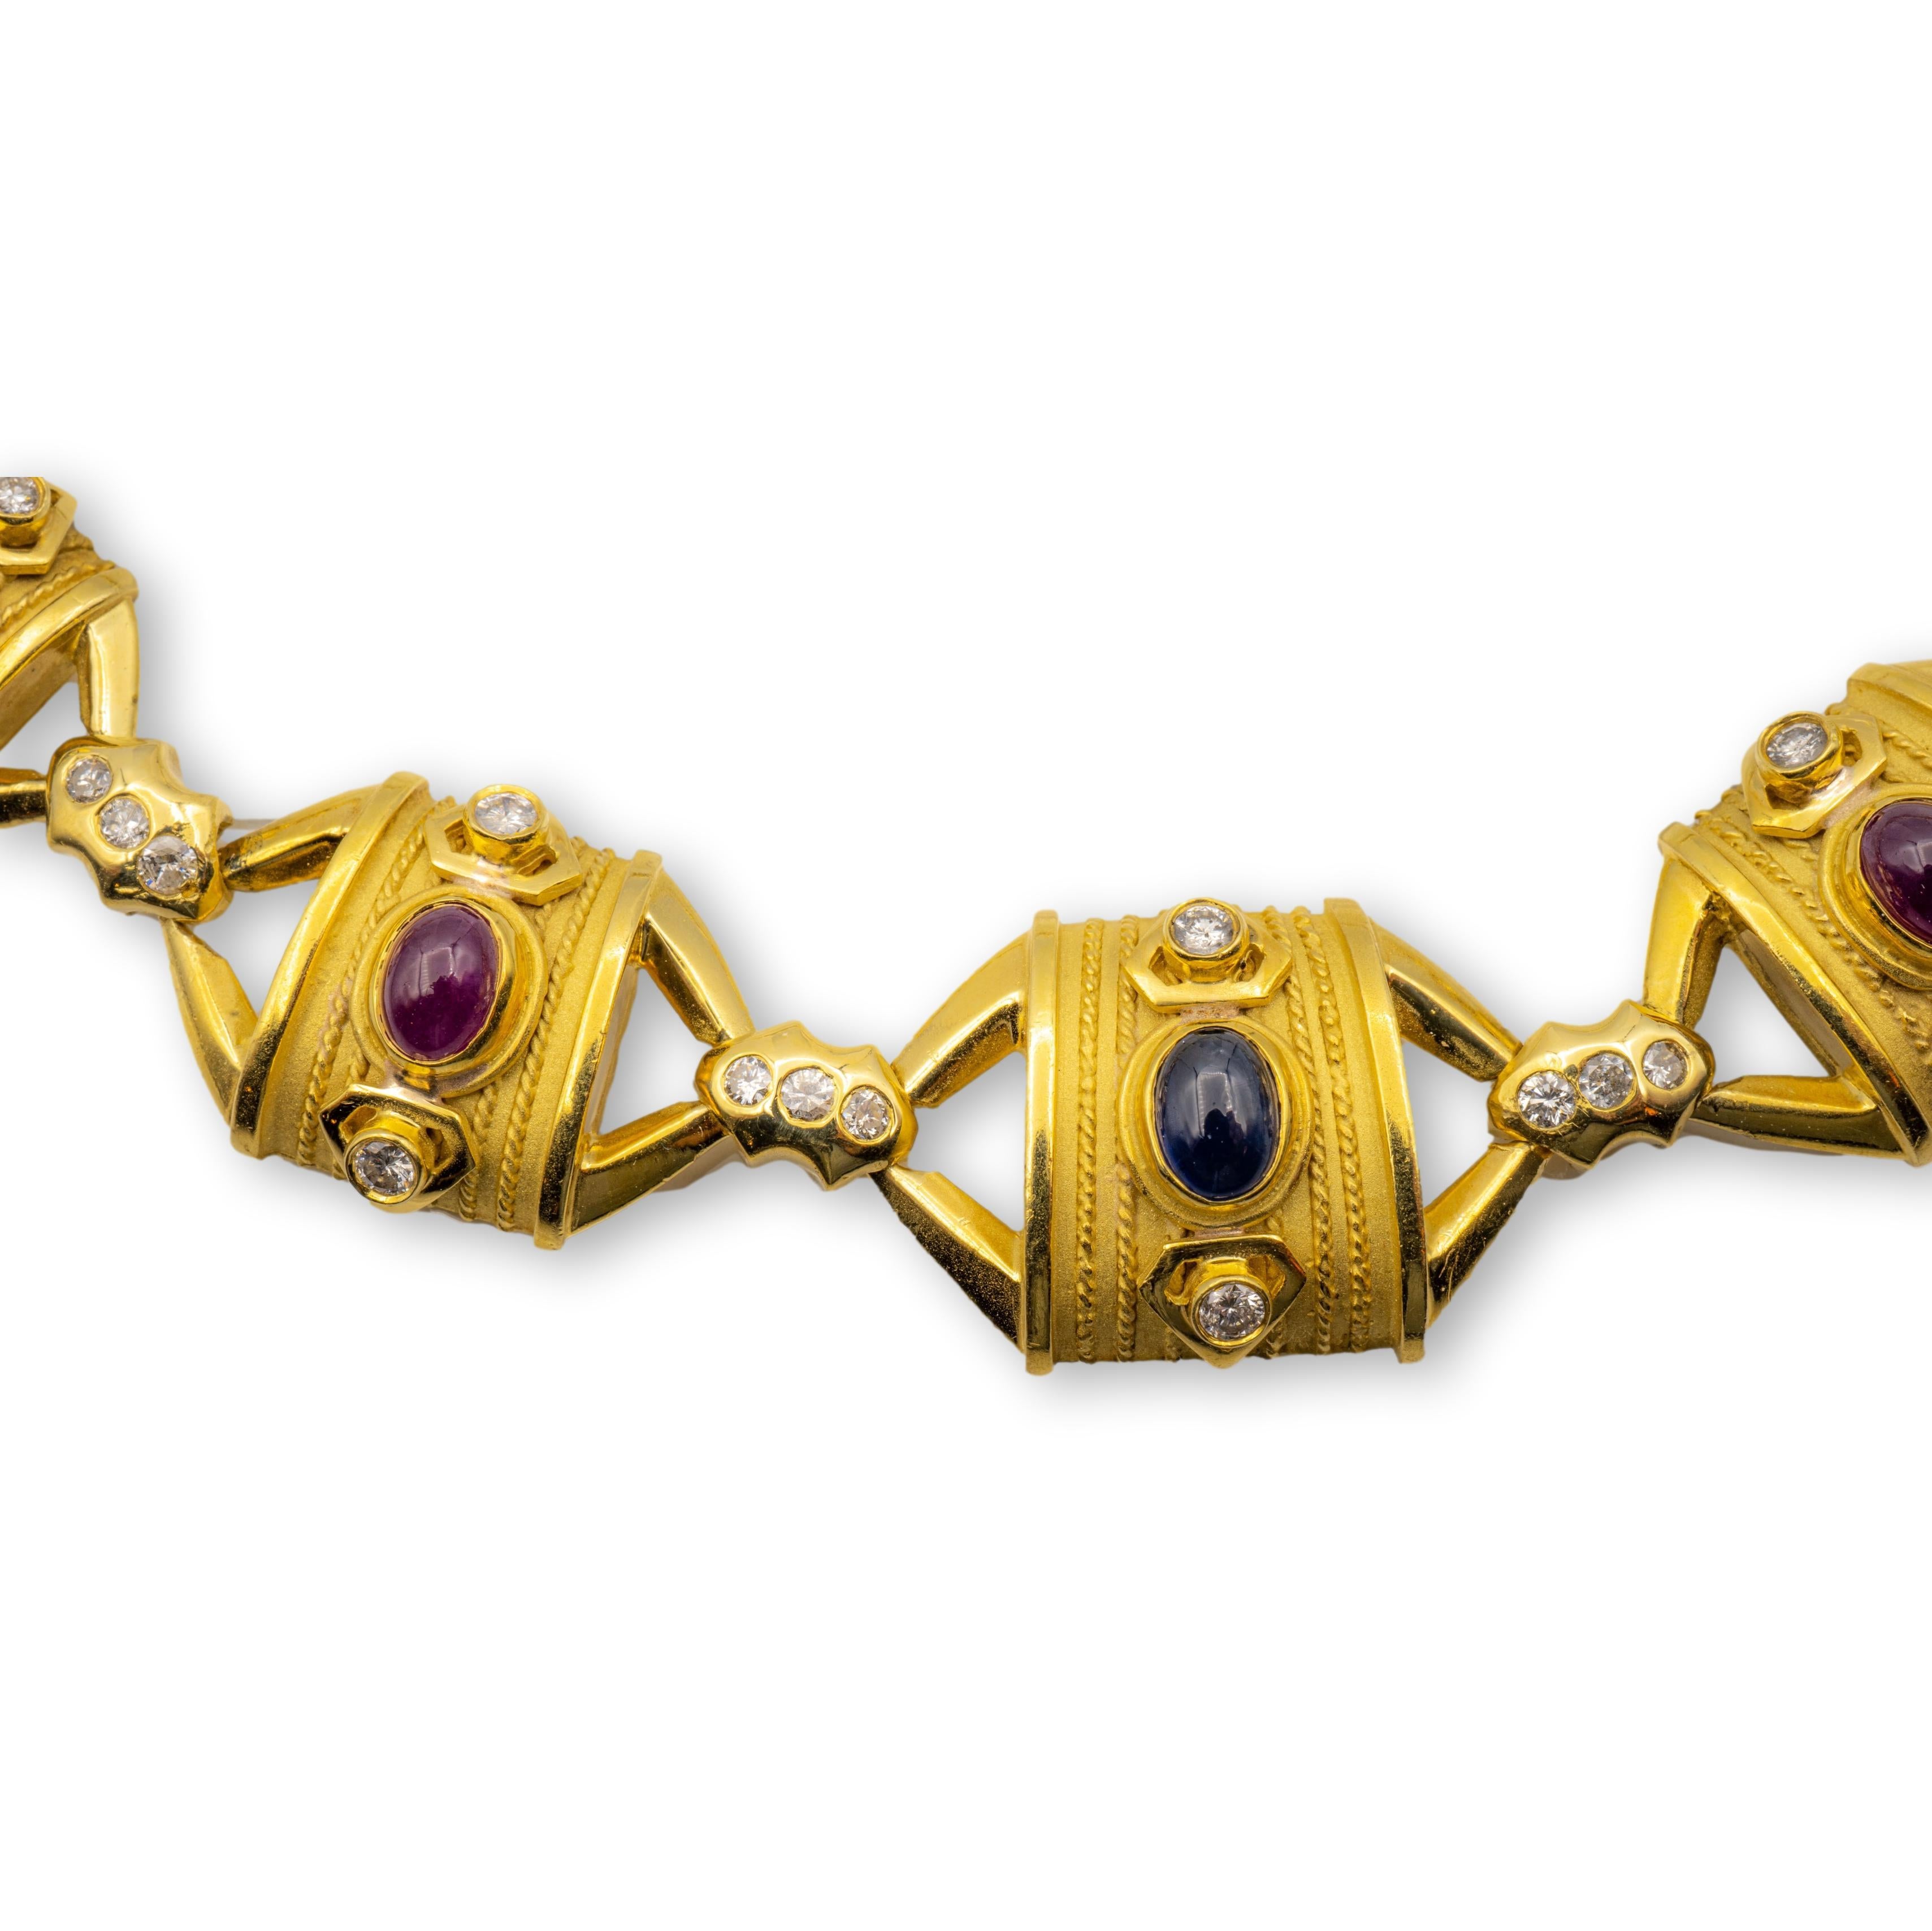 Vintage choker necklace finely crafted in 18 Karat yellow gold featuring cabochon Rubies , sapphires and emeralds and burnished set round brilliant cut diamonds weighing 2.70 carats total weight approximately. This necklace was handmade and has a